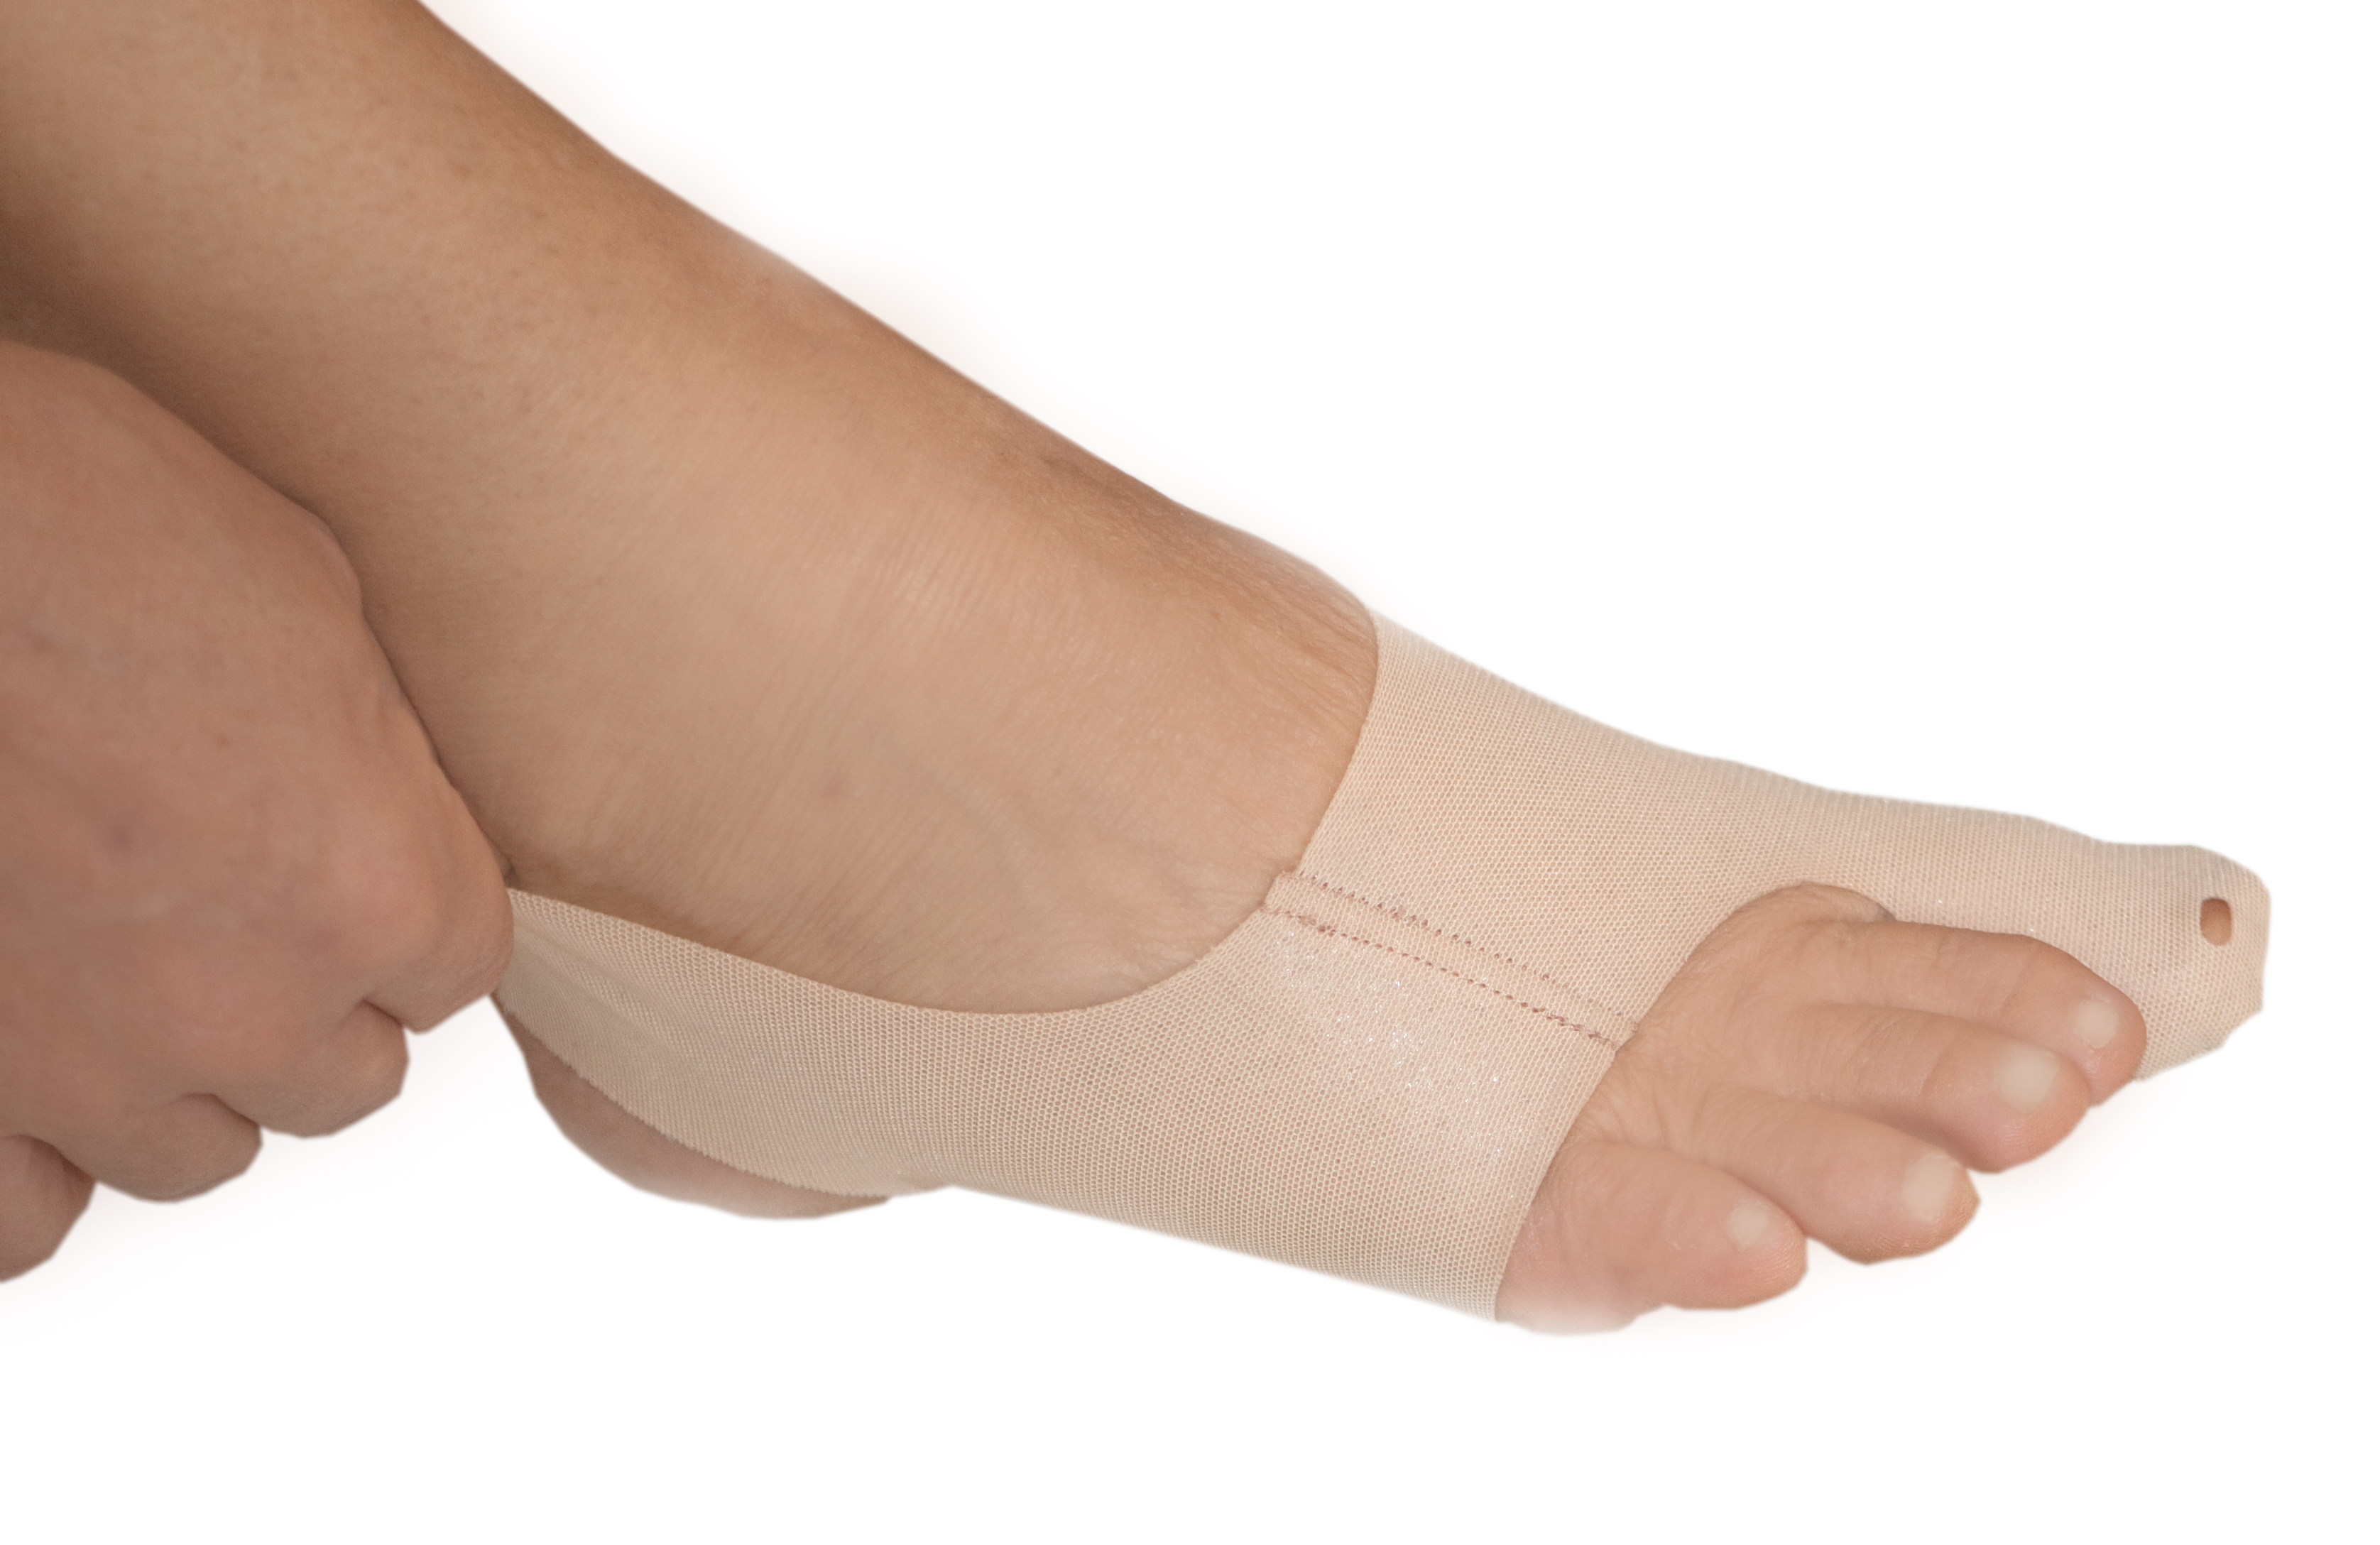 How do you get rid of bunions without surgery?